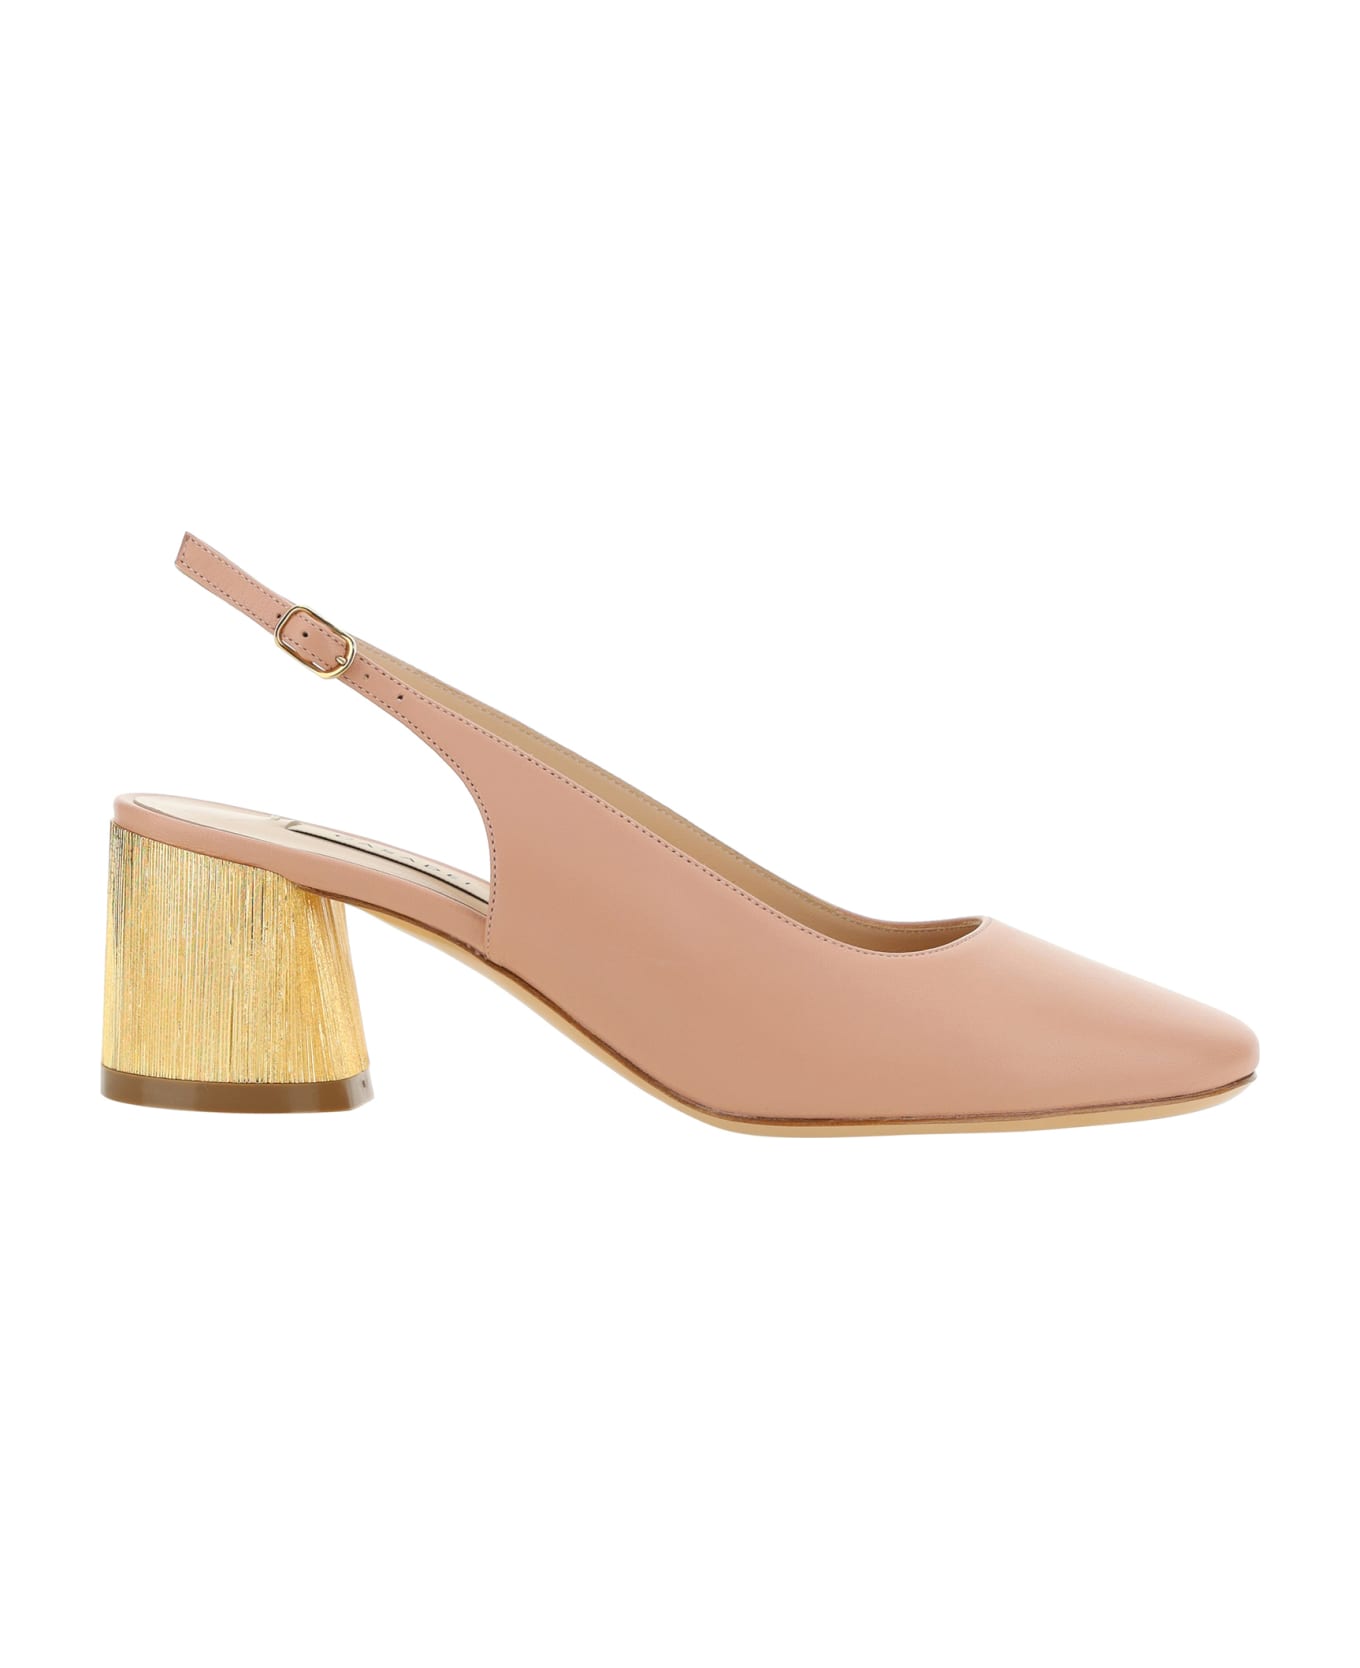 Casadei Cleo Emily Pumps - PINK